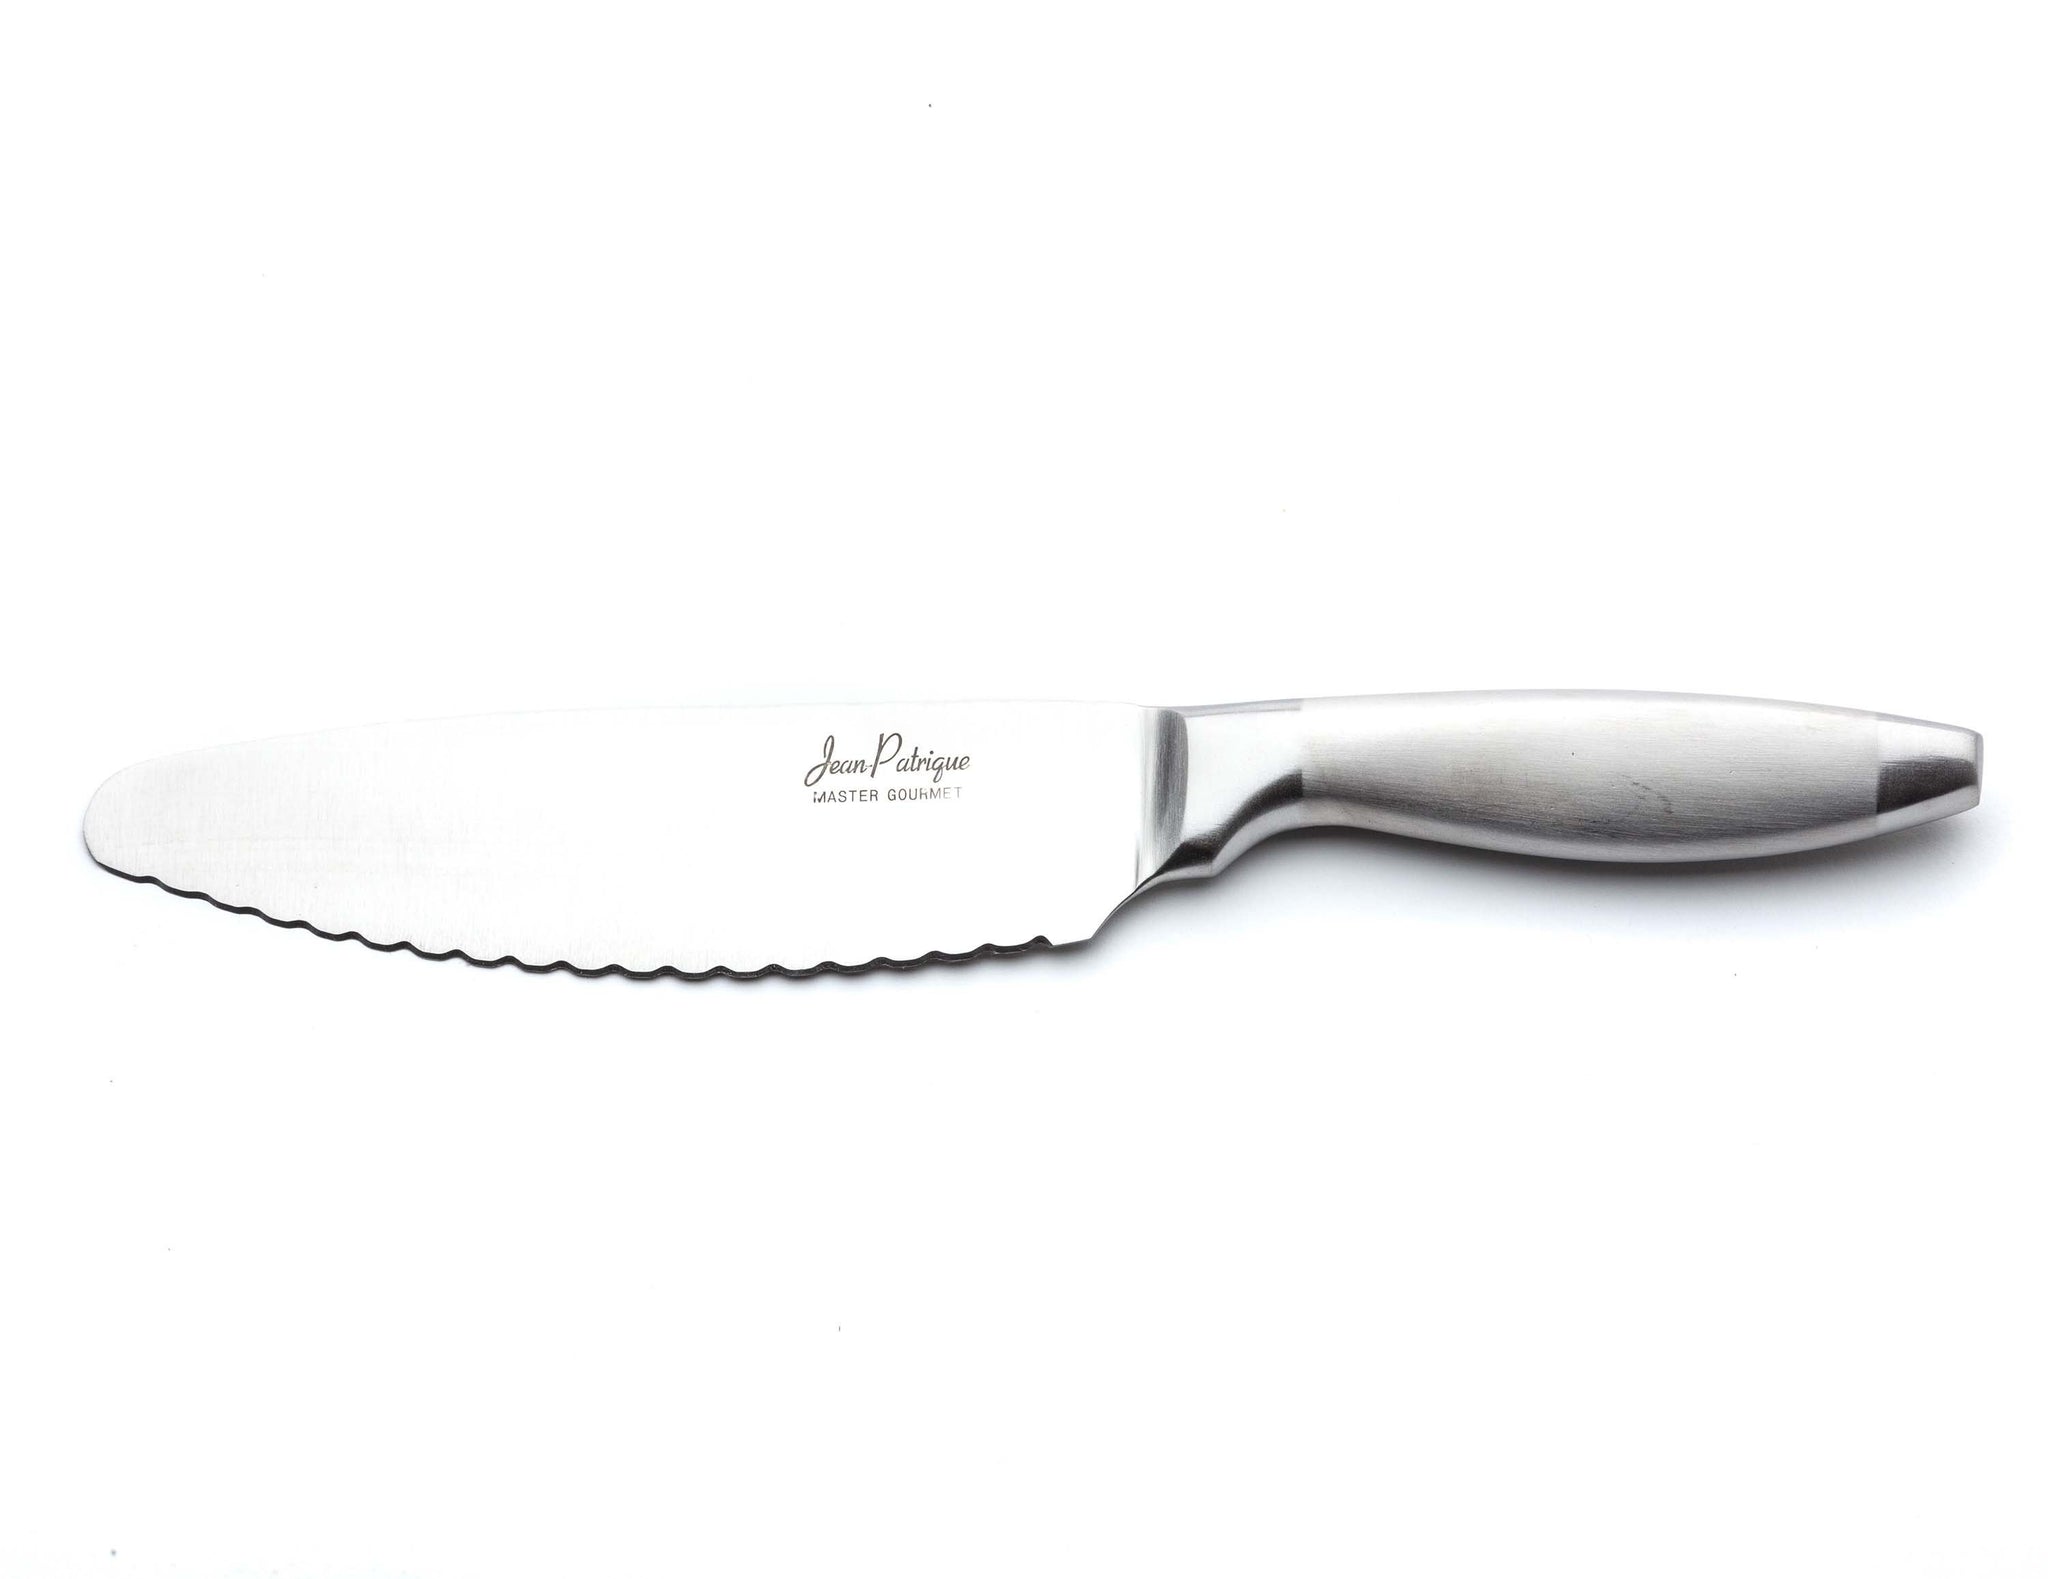 Master Gourmet Professional Stainless Steel Sandwich Knife